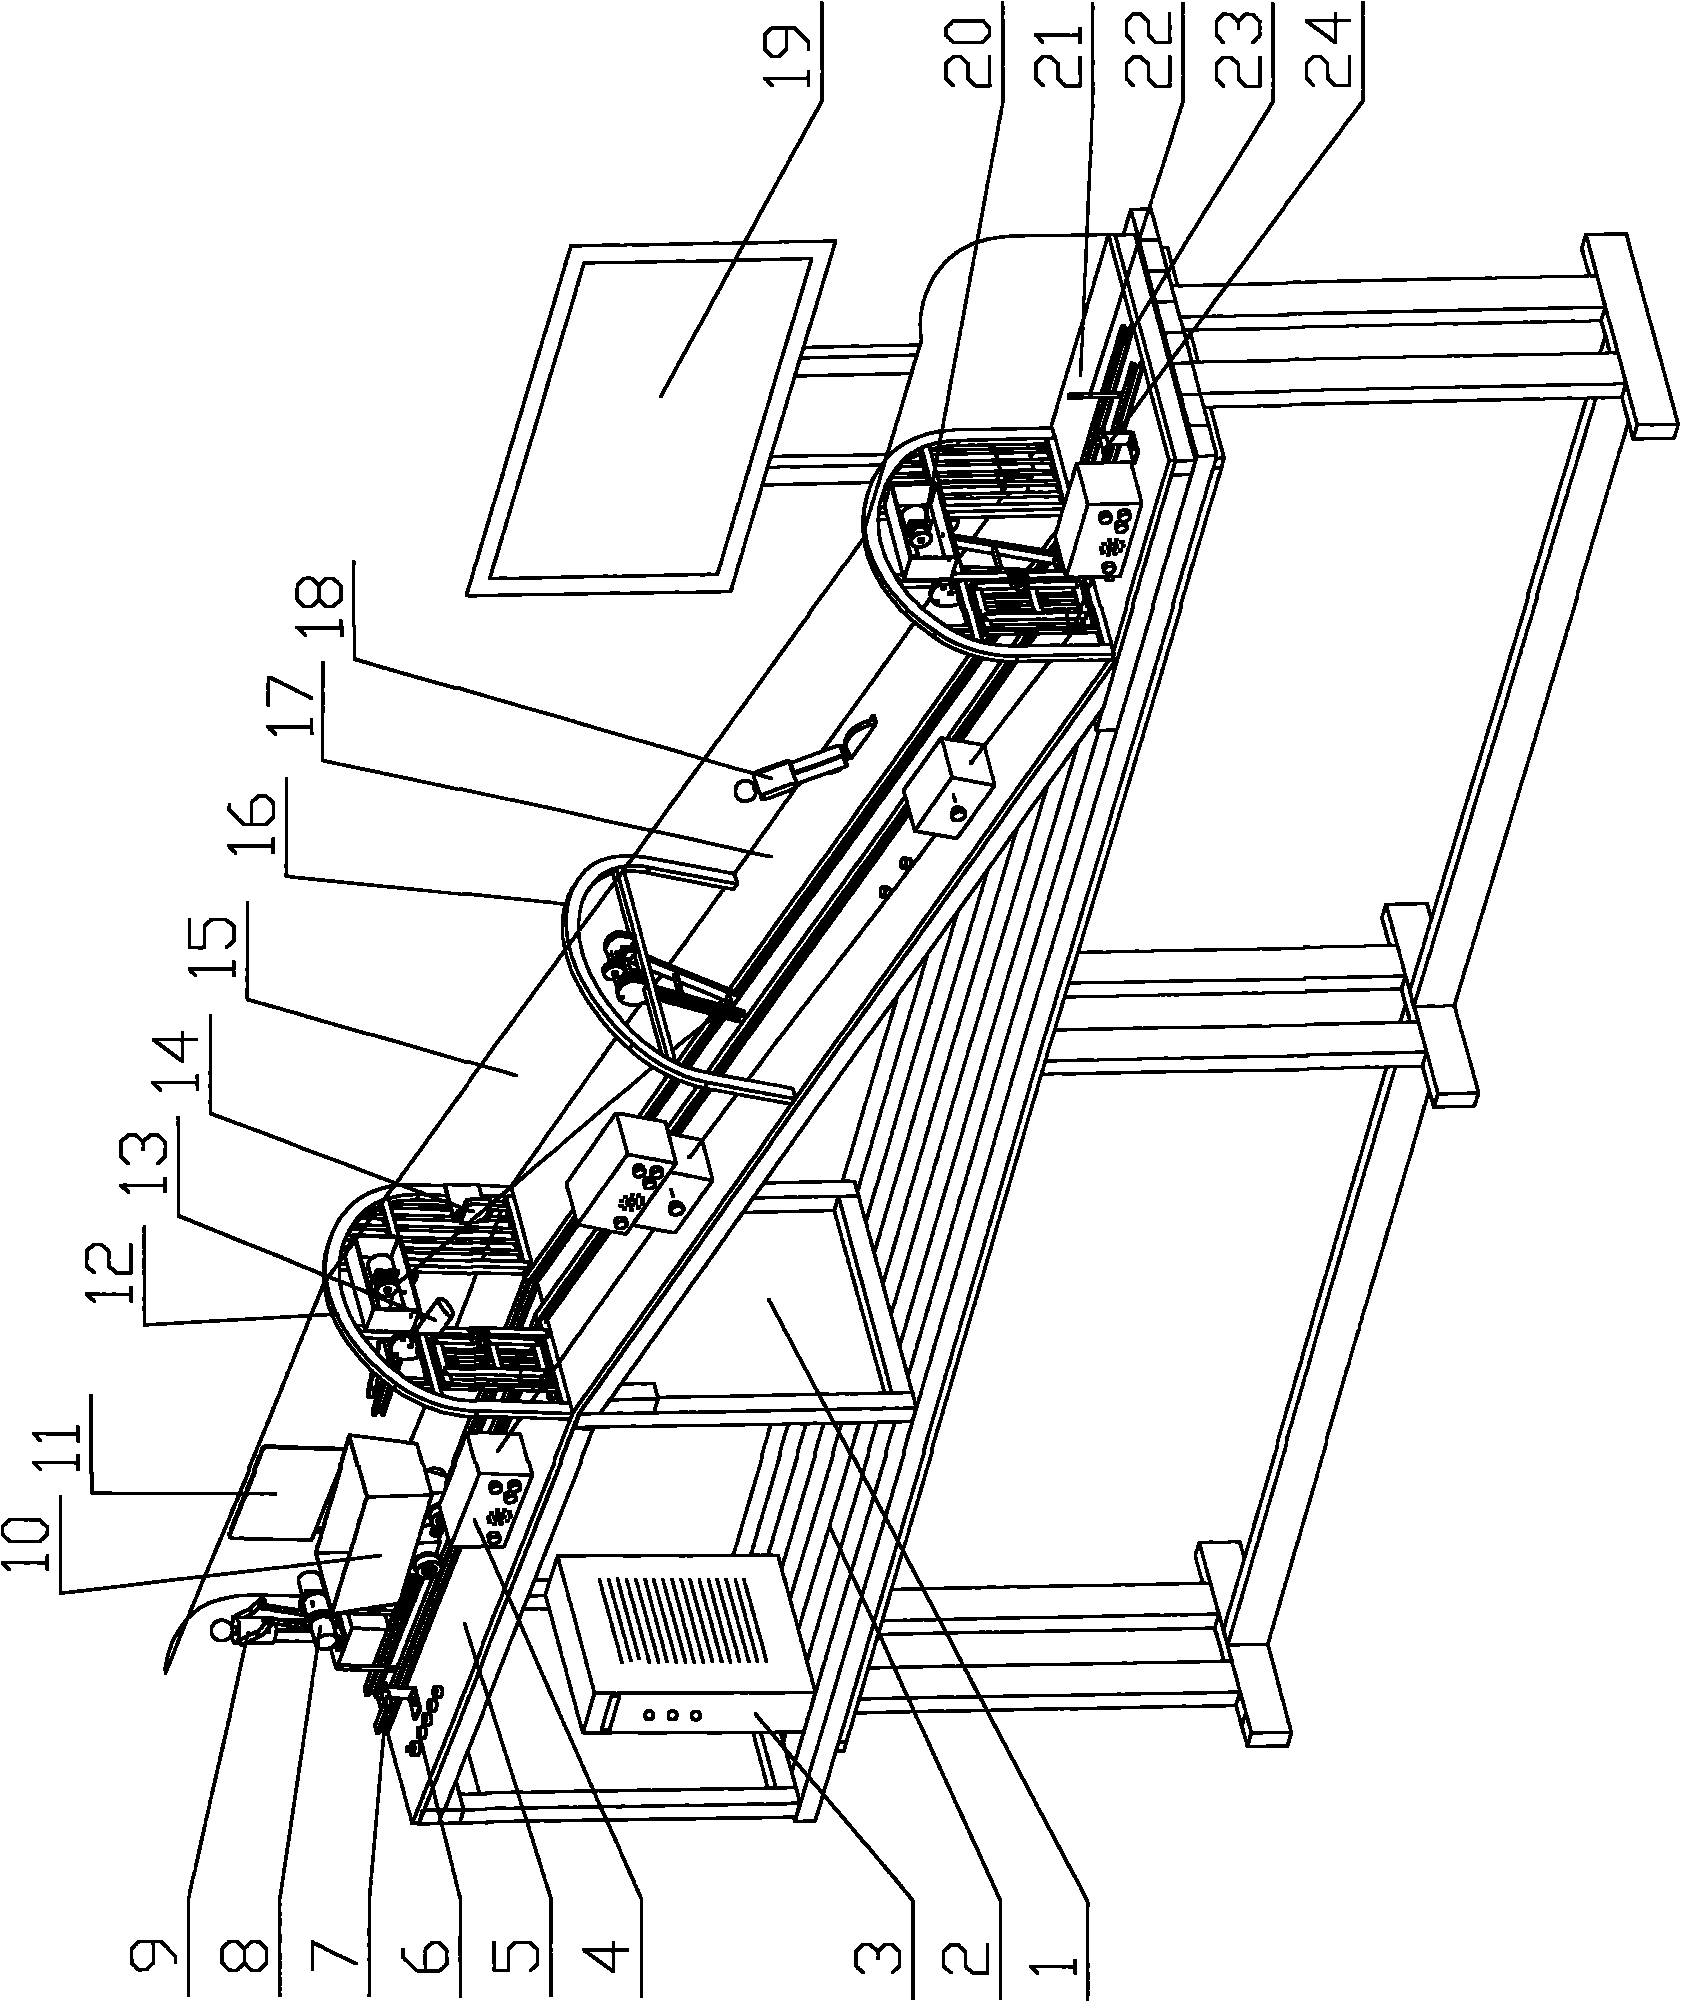 Inclined shaft (roadway) transportation human-oriented safety monitoring and training system in mining area and manufacturing method